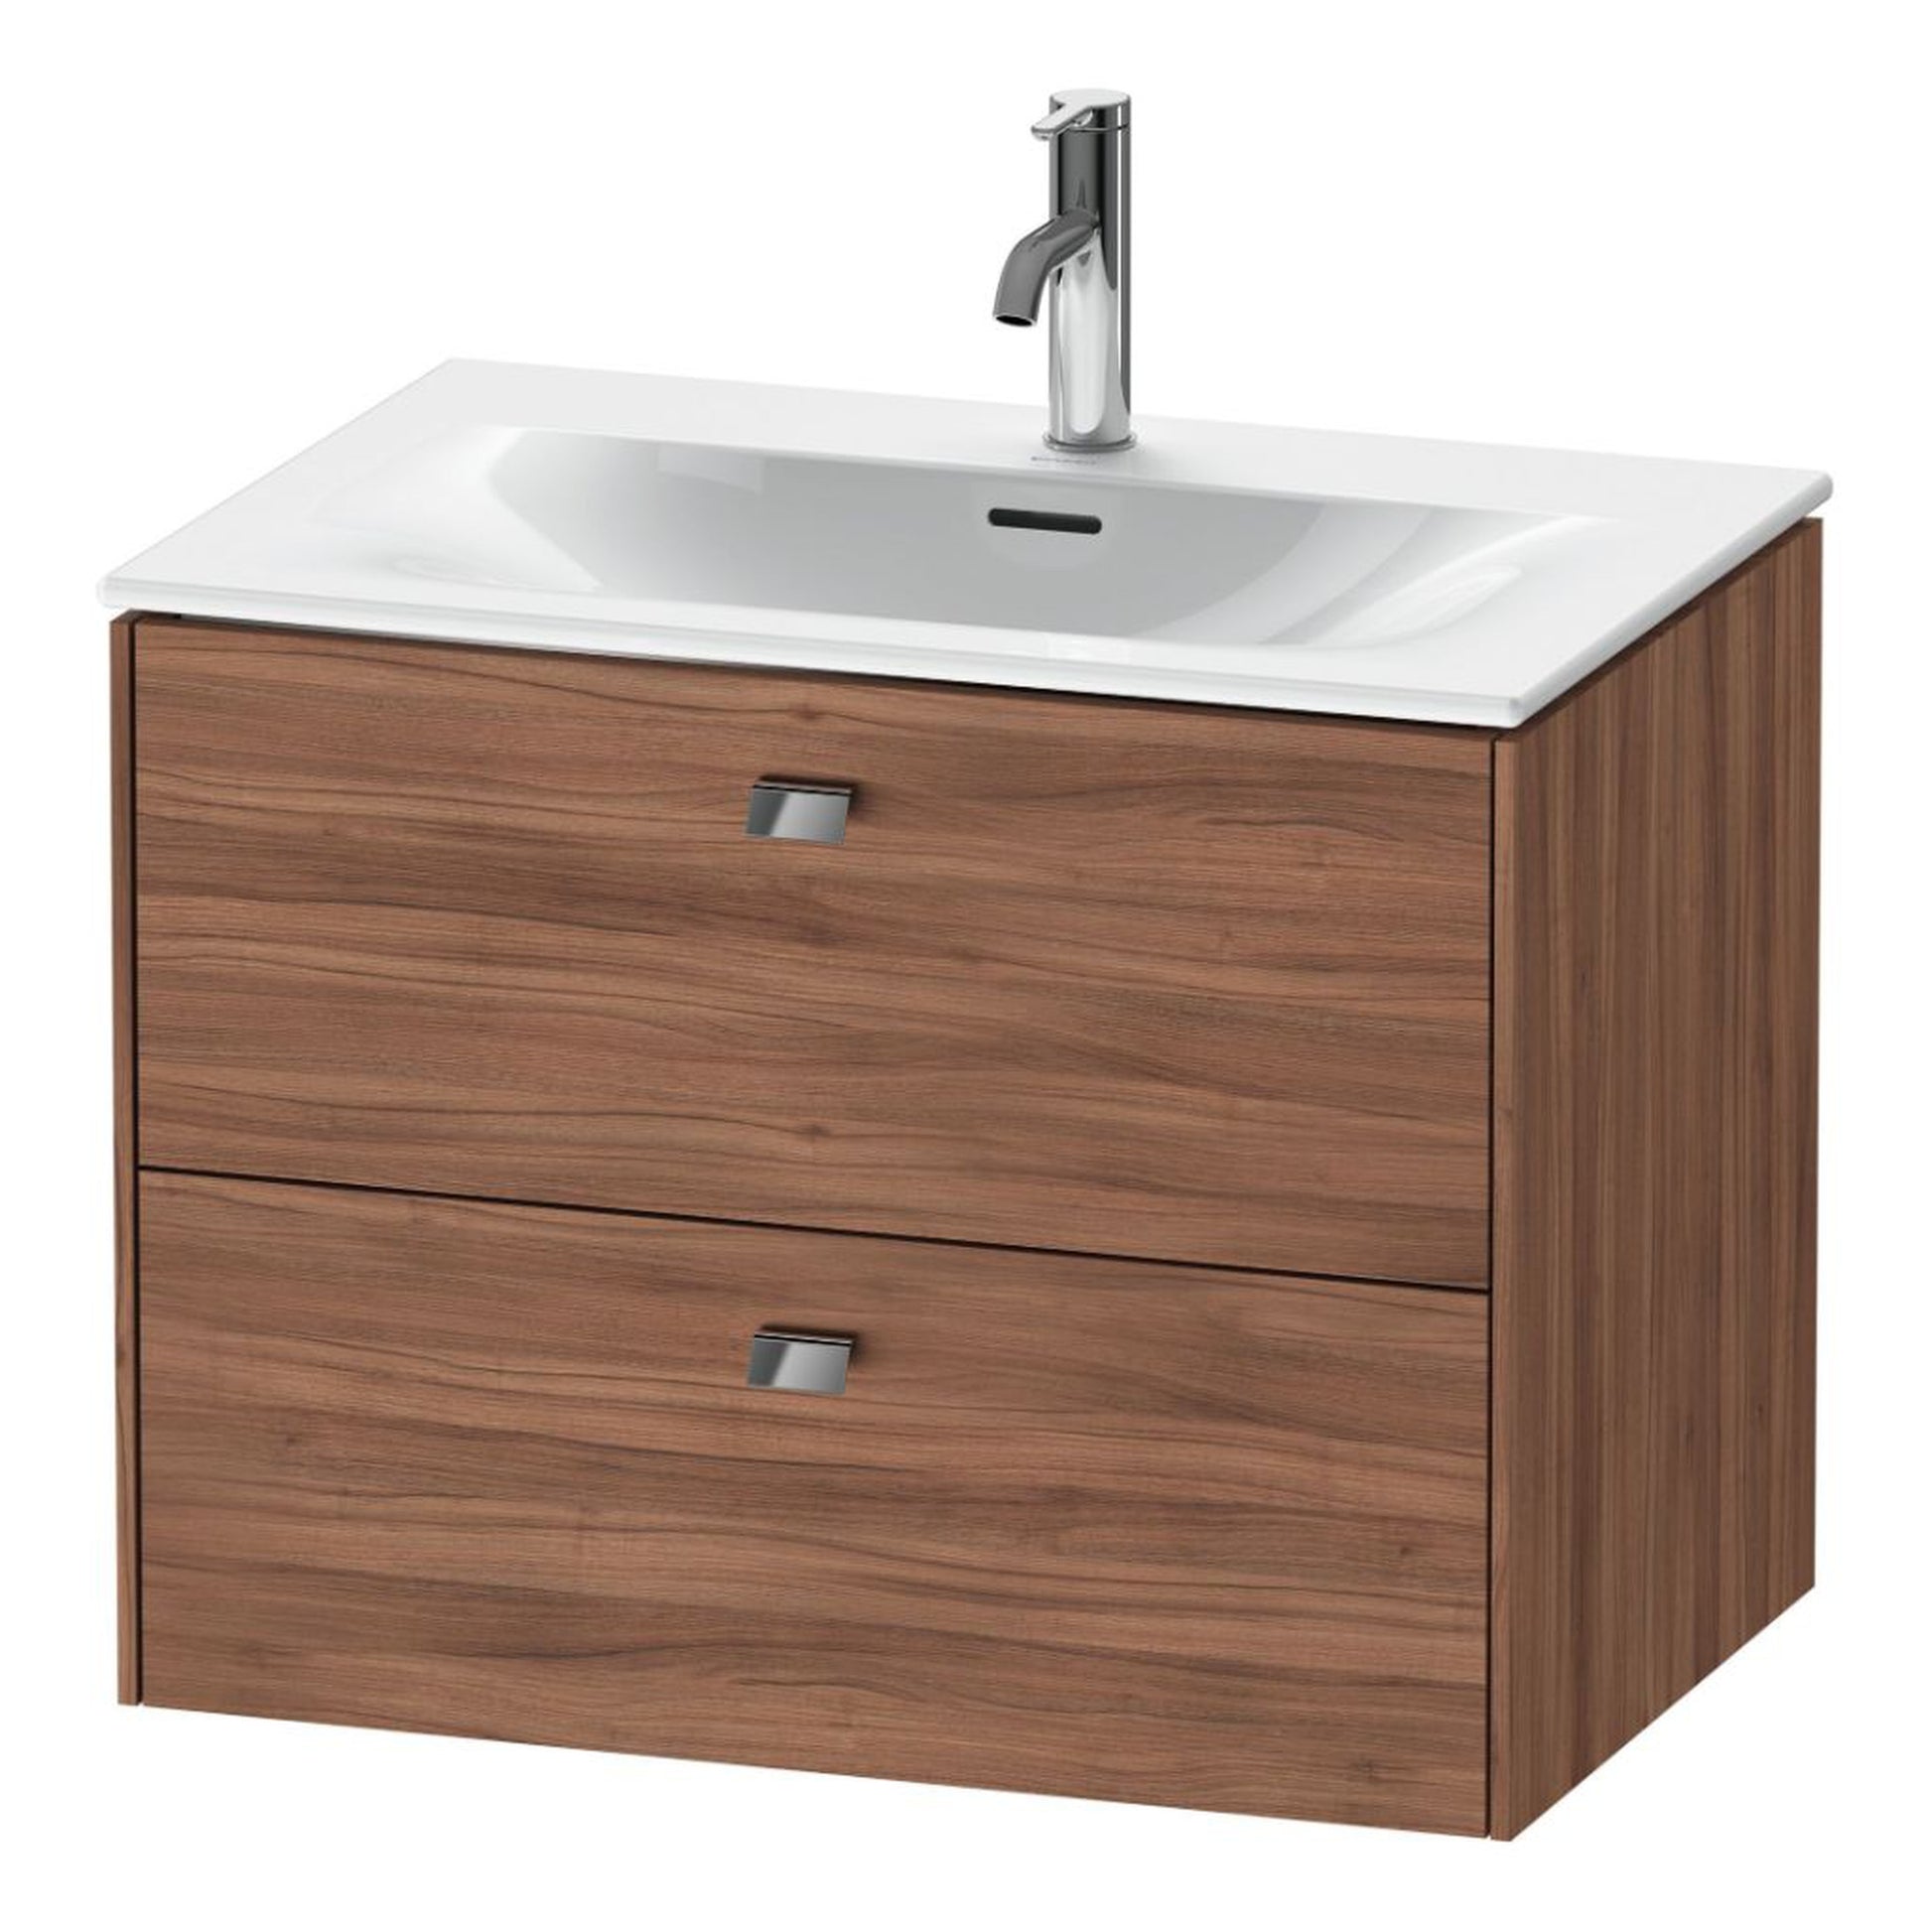 Duravit Brioso BR43110 28" x 22" x 19" Two Drawer Wall-Mount Vanity Unit in Natural Walnut and Chrome Handle